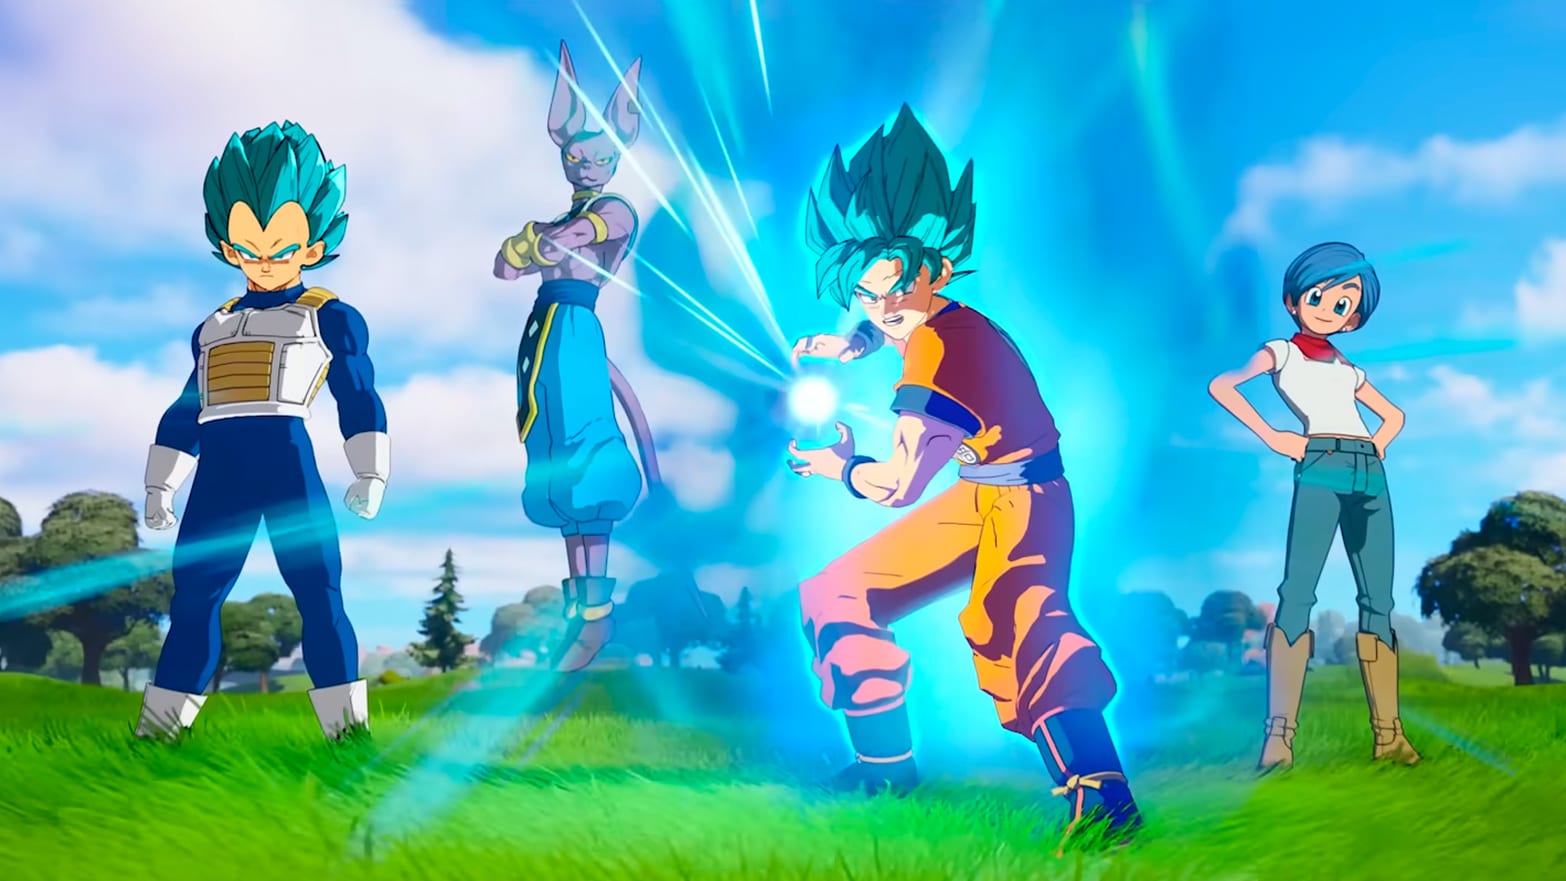 Dragon Ball Z Online Epic web based game free to play